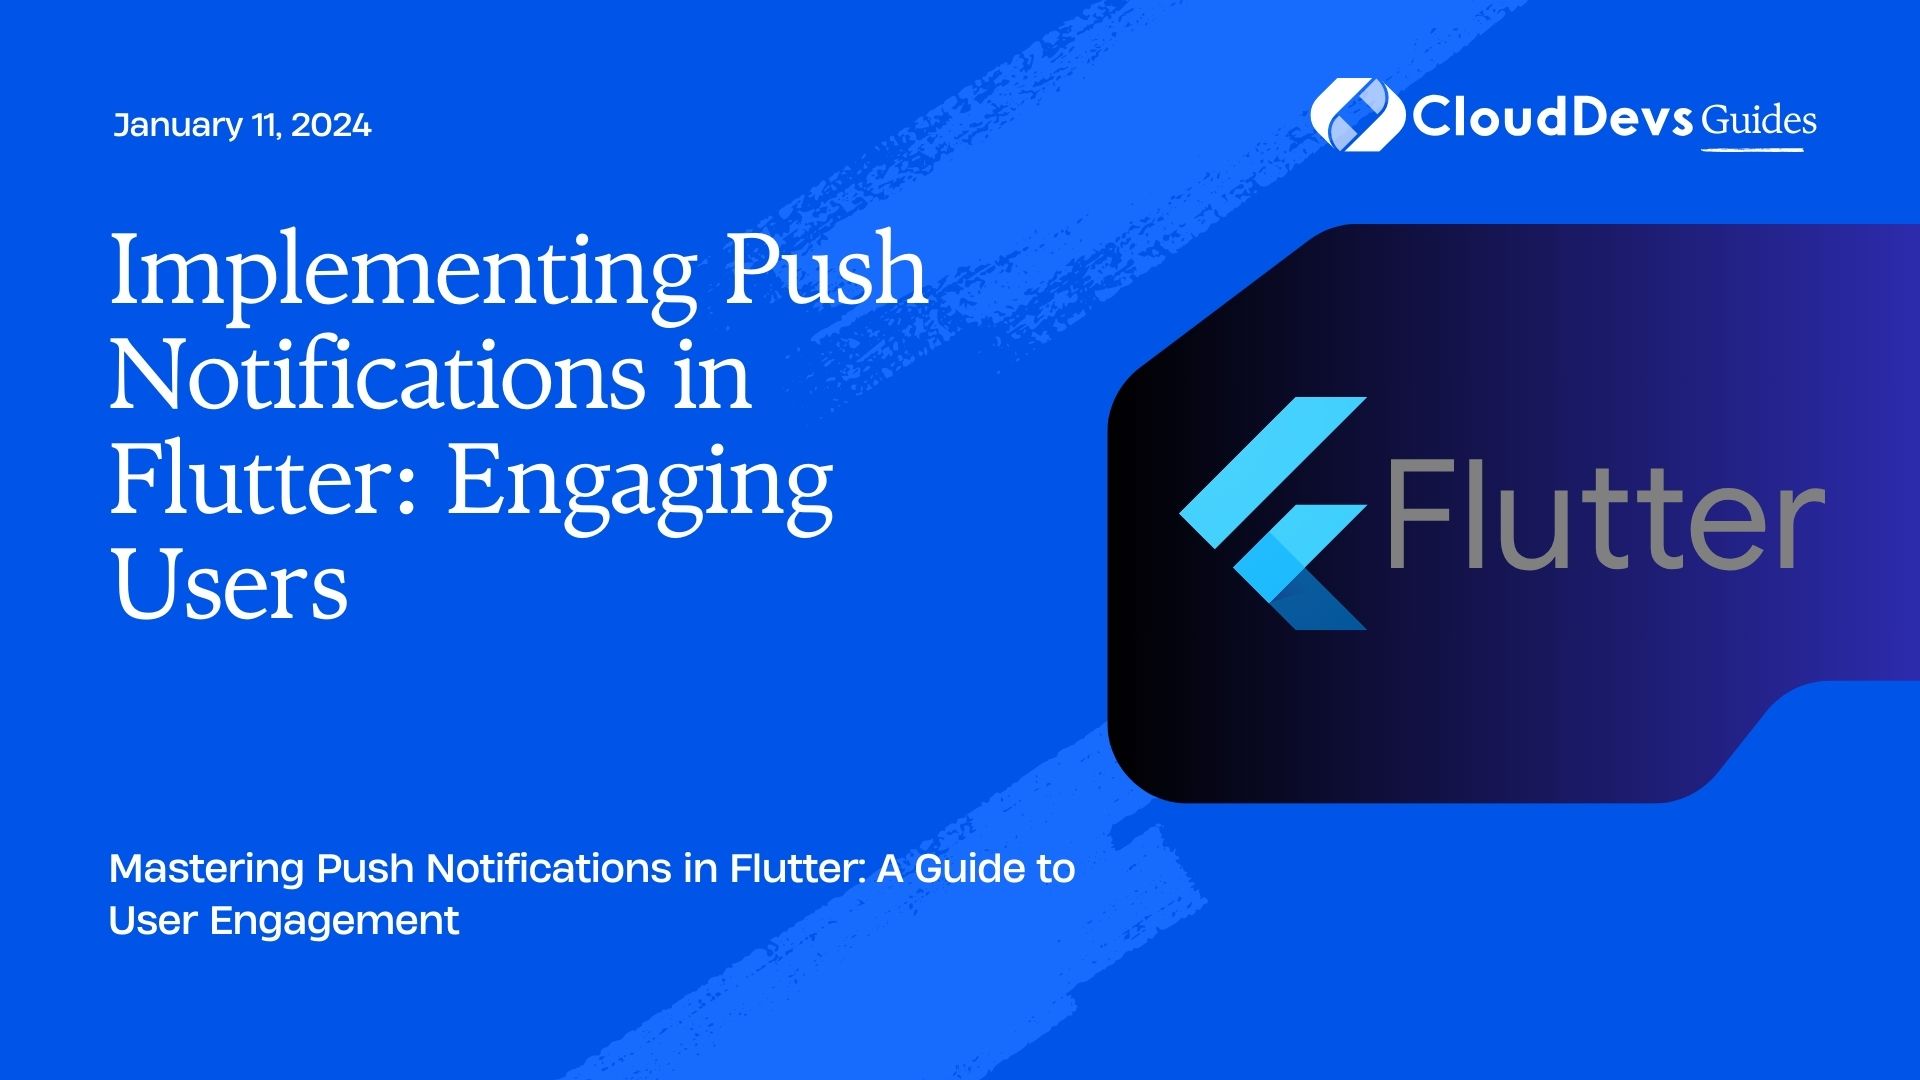 Implementing Push Notifications in Flutter: Engaging Users